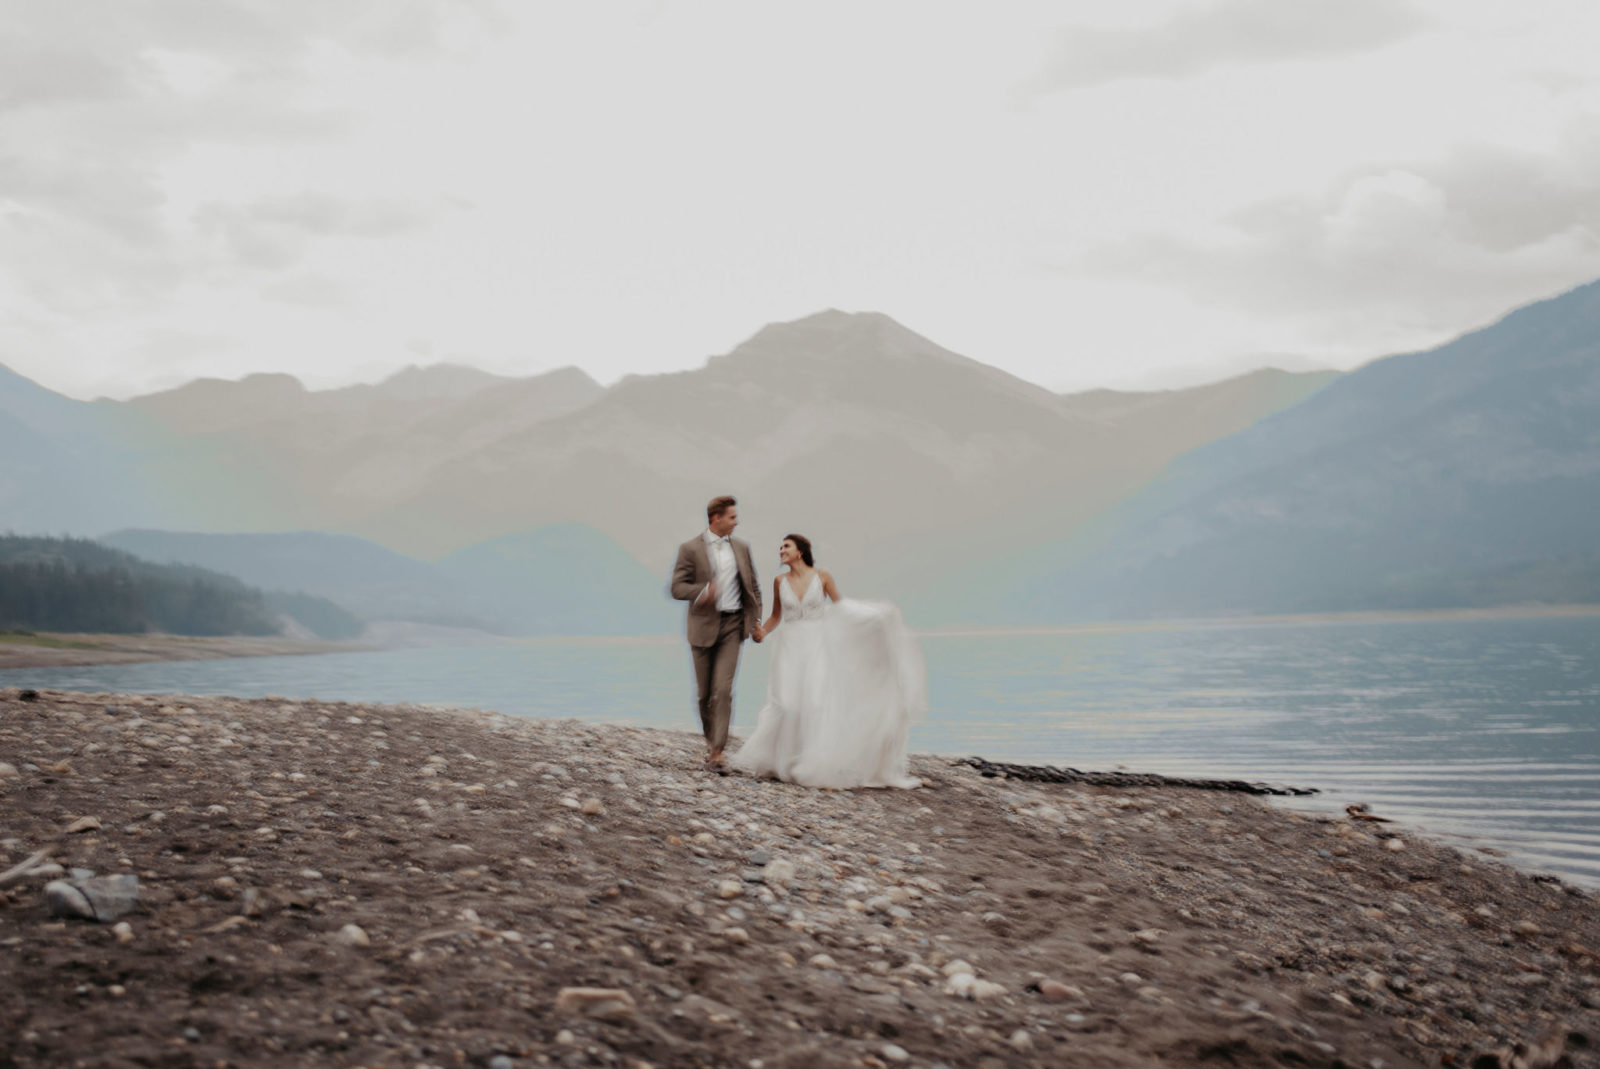 Wedding portraits during blue hour in the mountains